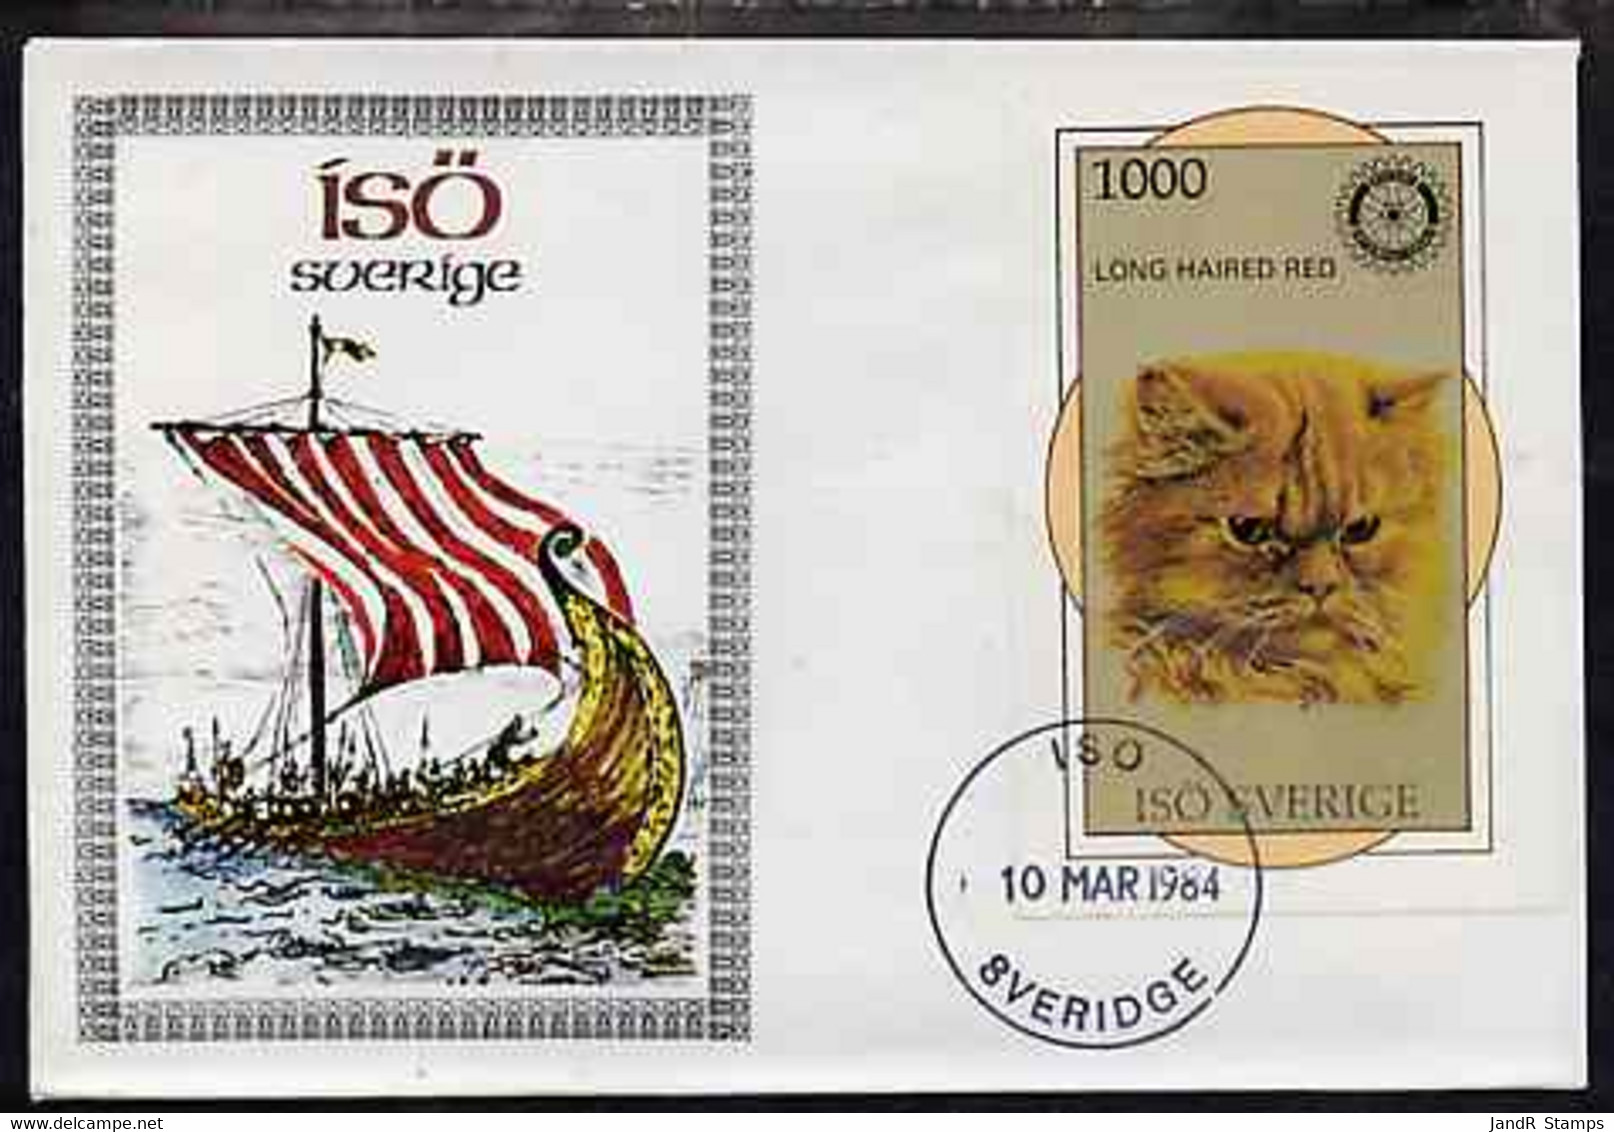 Iso - Sweden 1984 Rotary - Domestic Cats (Long Haired Red) Imperf Deluxe Sheet (1000 Value) On Cover With First Day Canc - Lokale Uitgaven